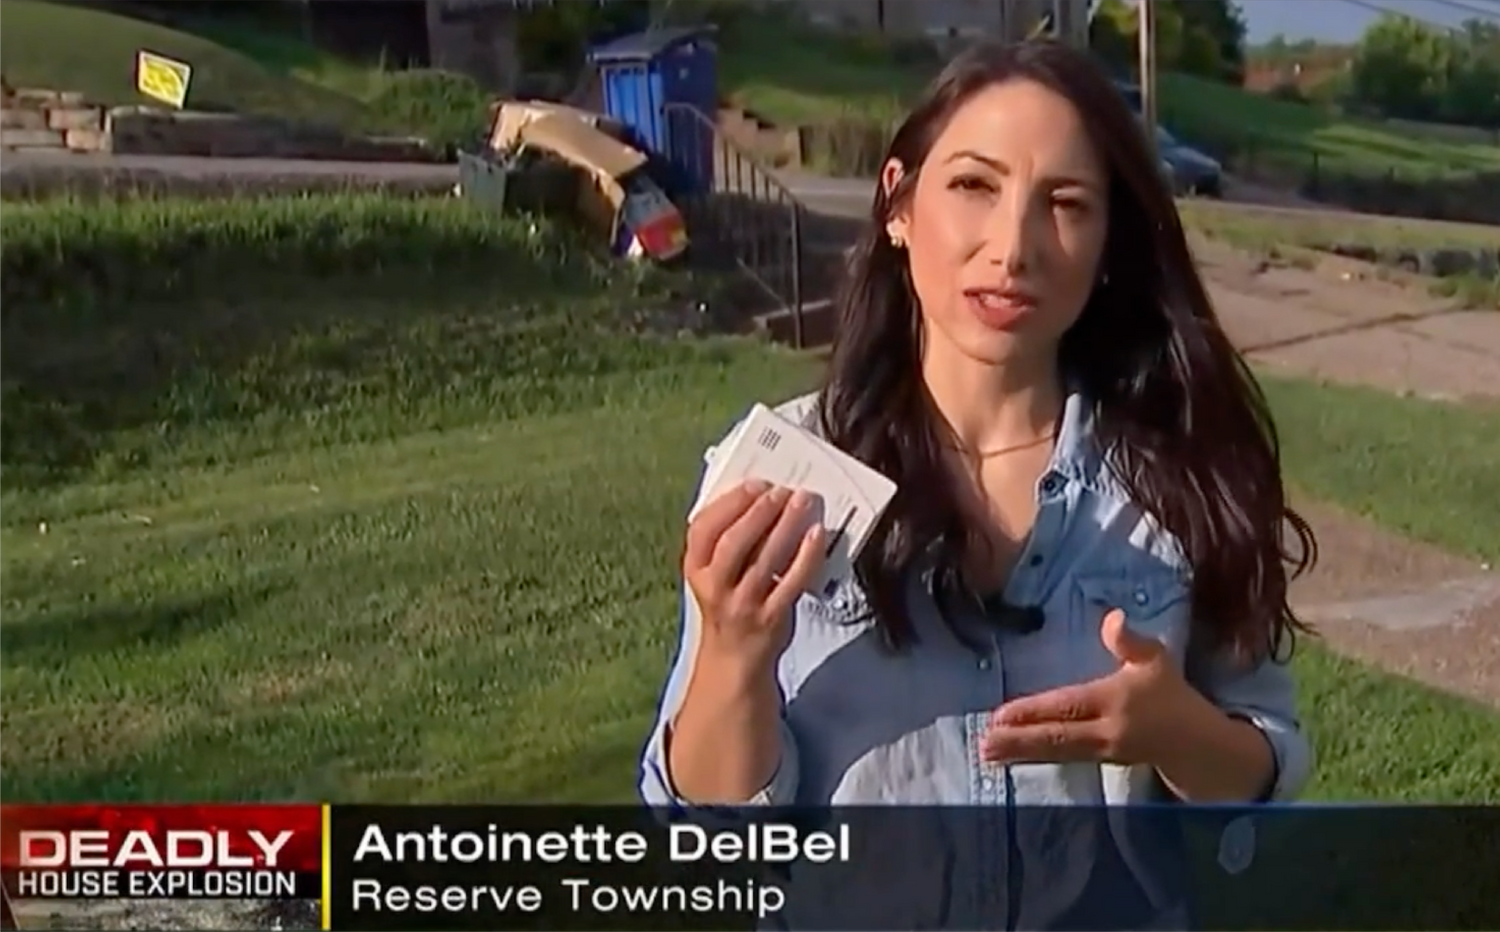 ABC WPXI News Highlights Natural Gas Safety with Our Alarms